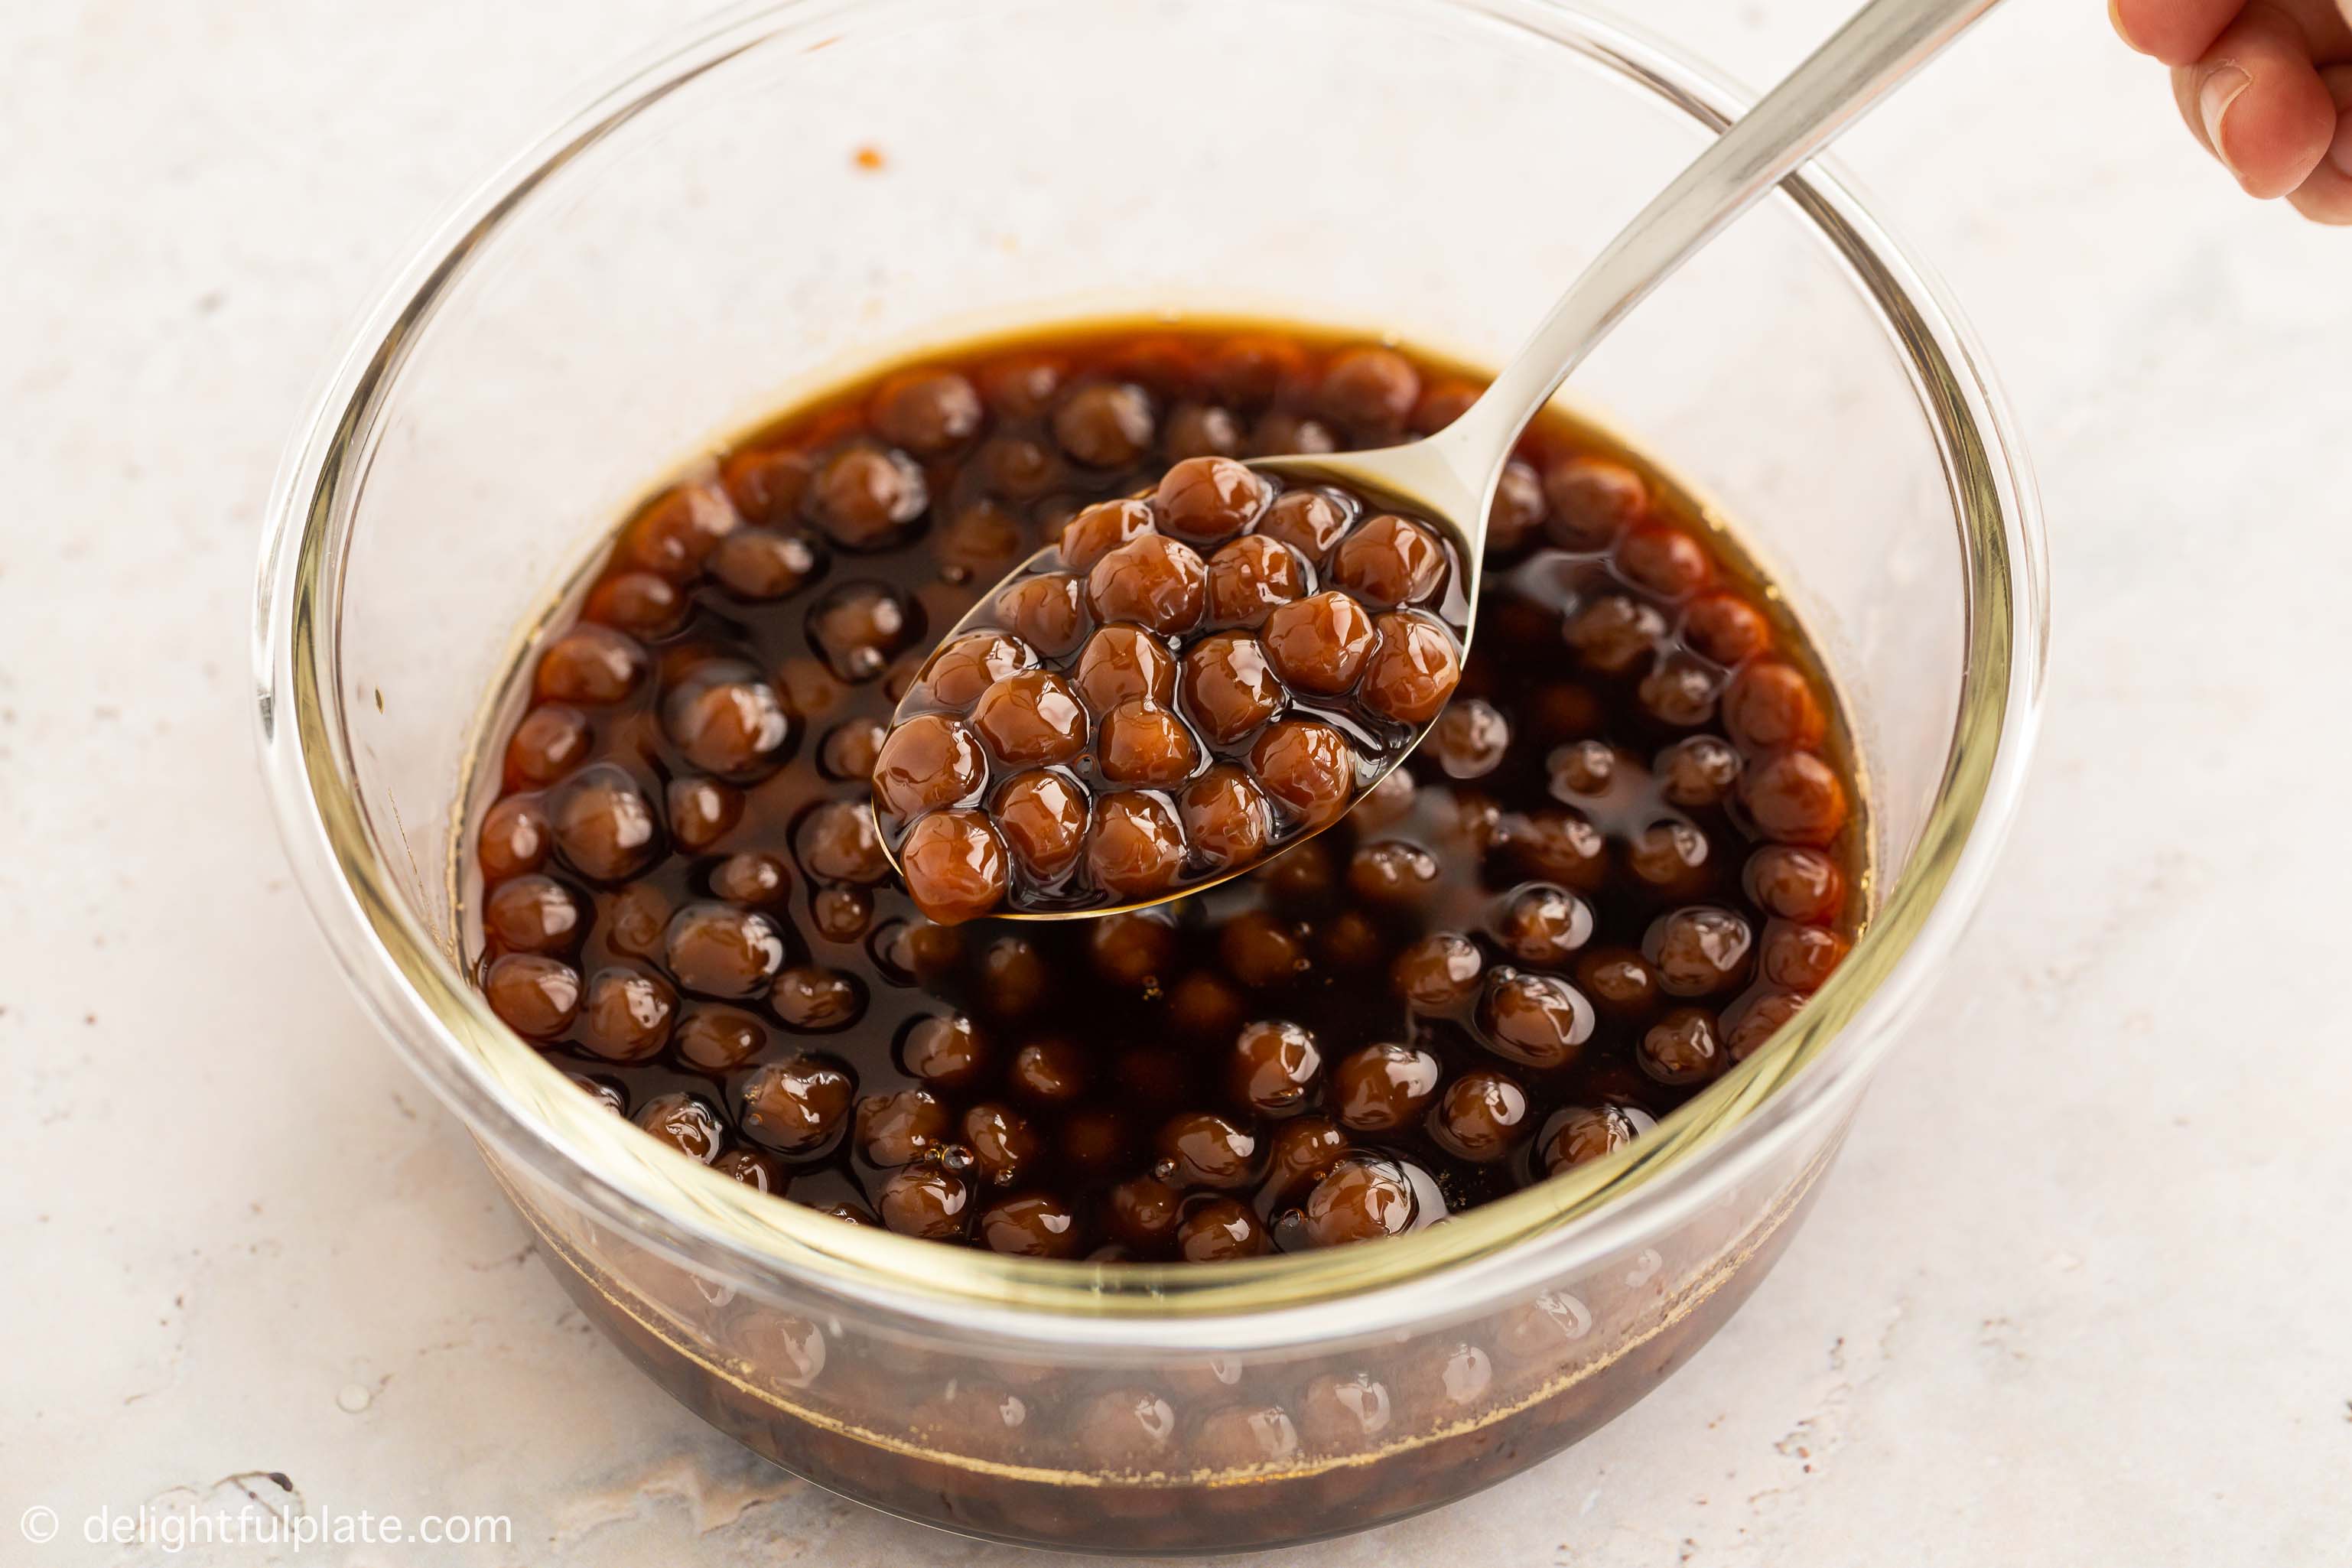 A container with black boba pearls in simple brown sugar syrup